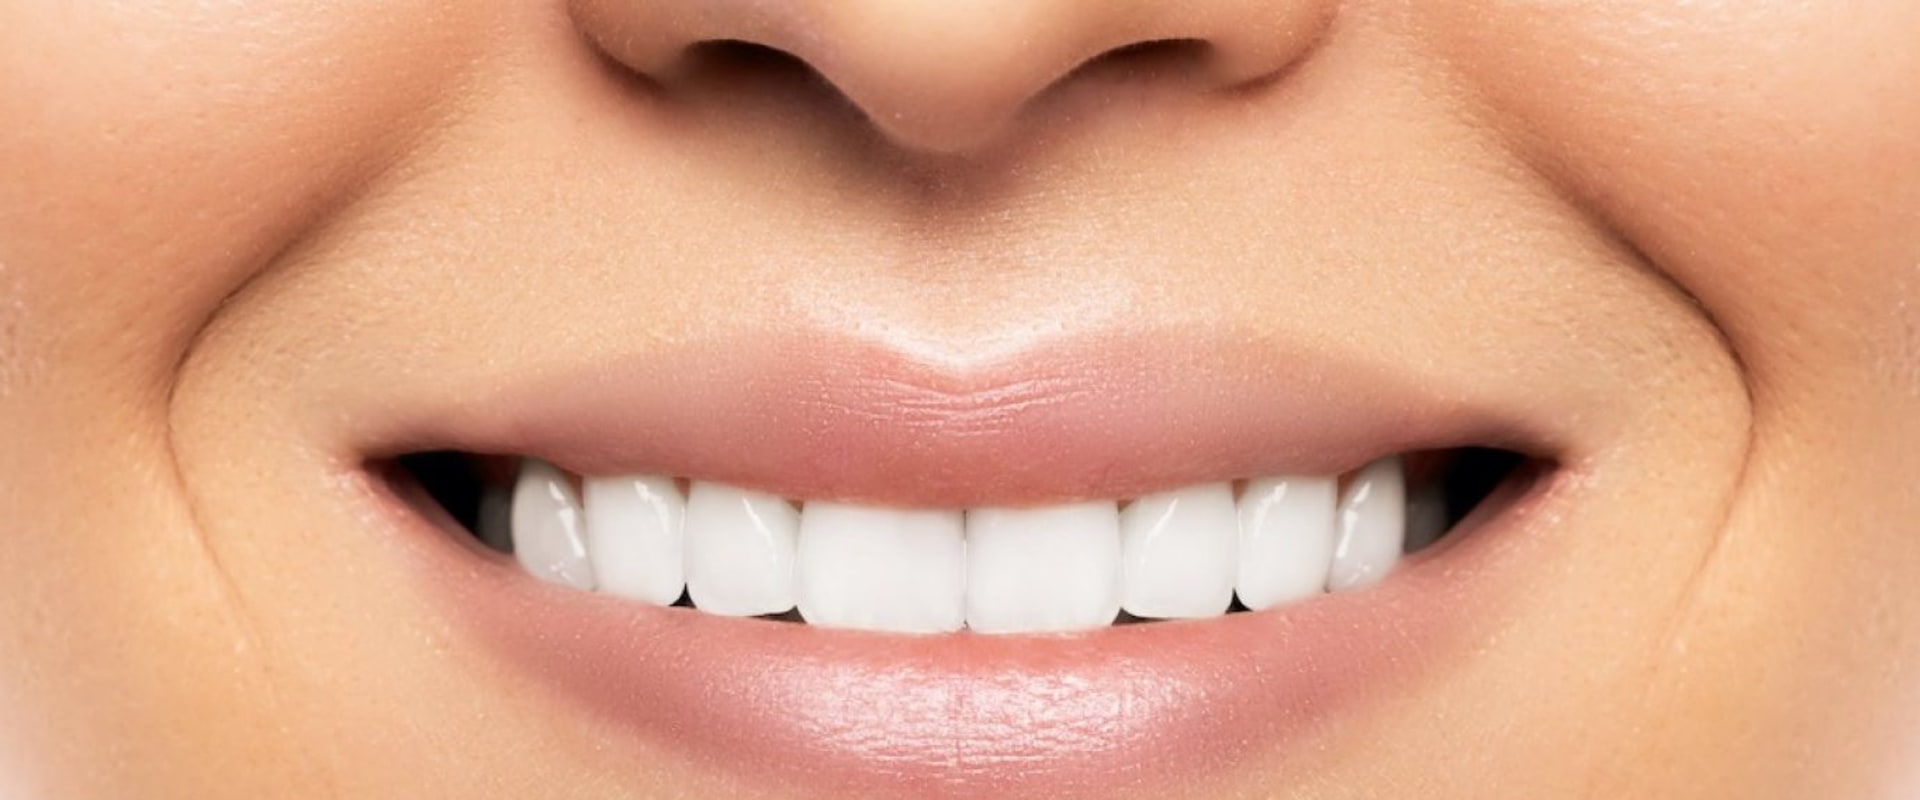 How to Achieve a Brighter and Whiter Smile: The Ultimate Guide to Teeth Whitening